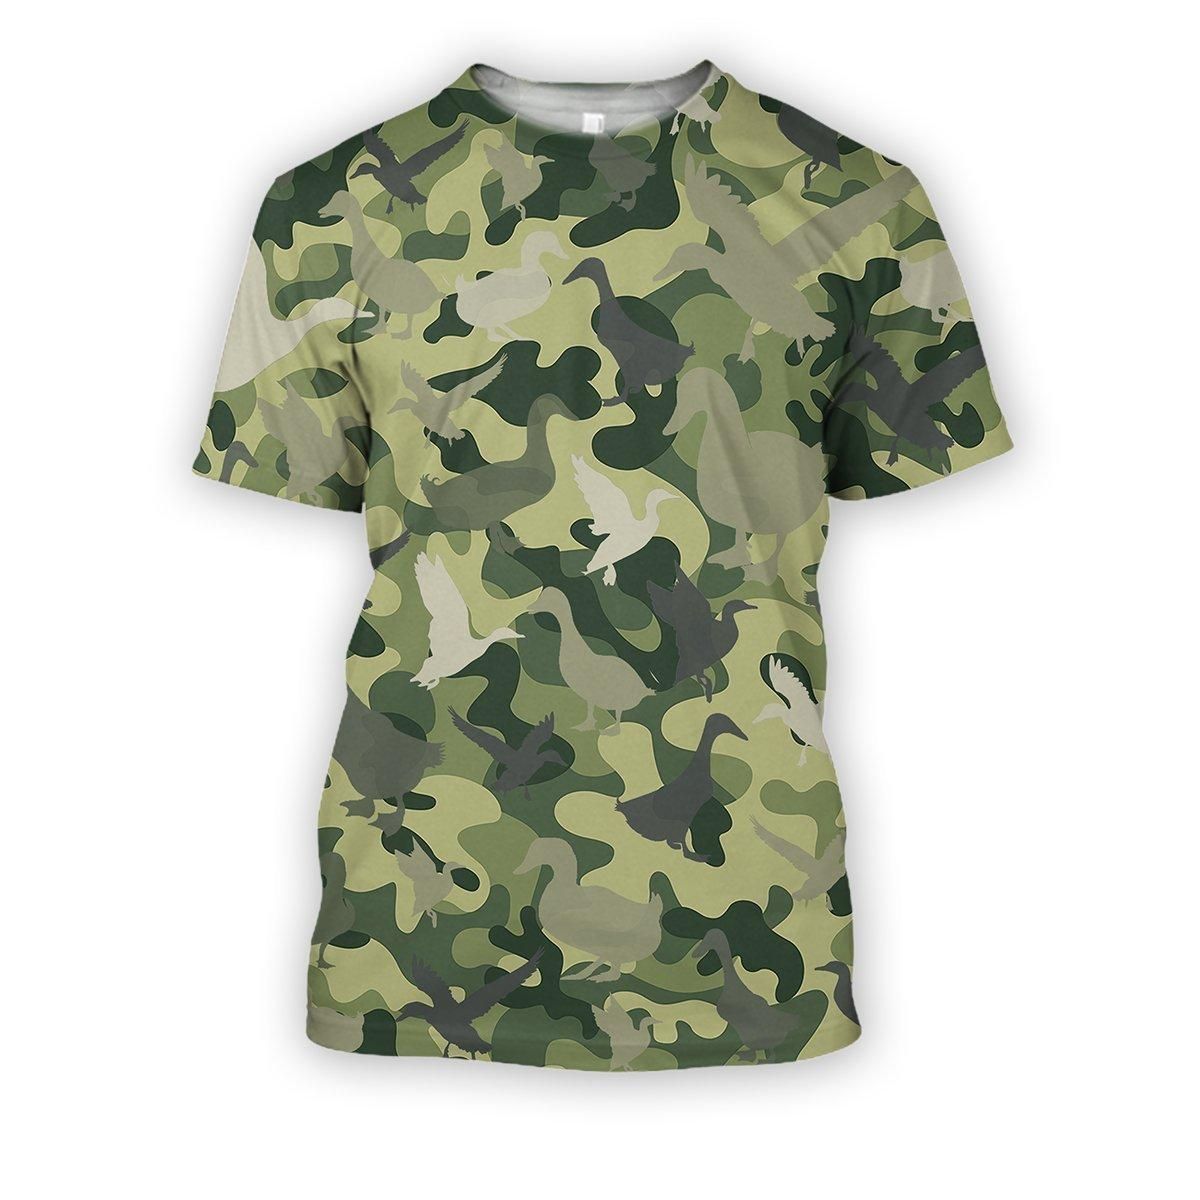 All Over Printed Hunting Duck Camo Shirts